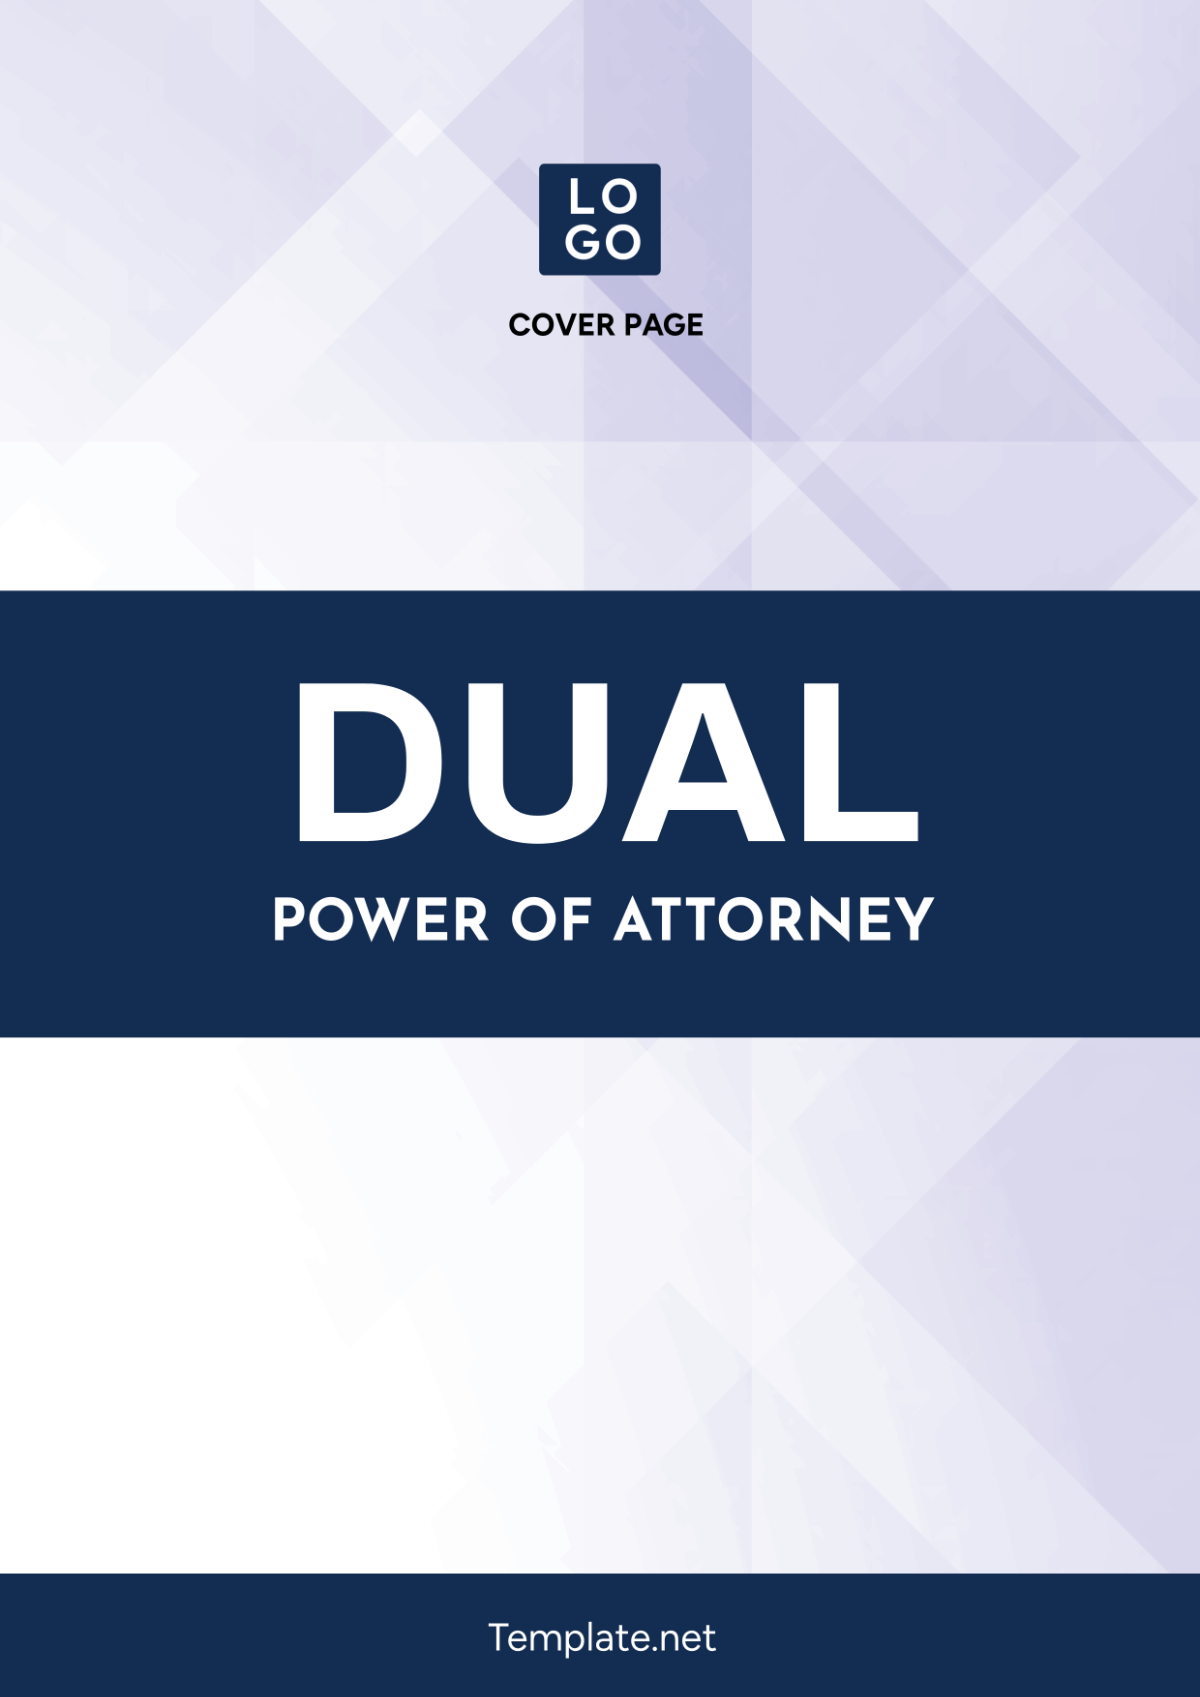 Dual Power of Attorney Cover Page Template